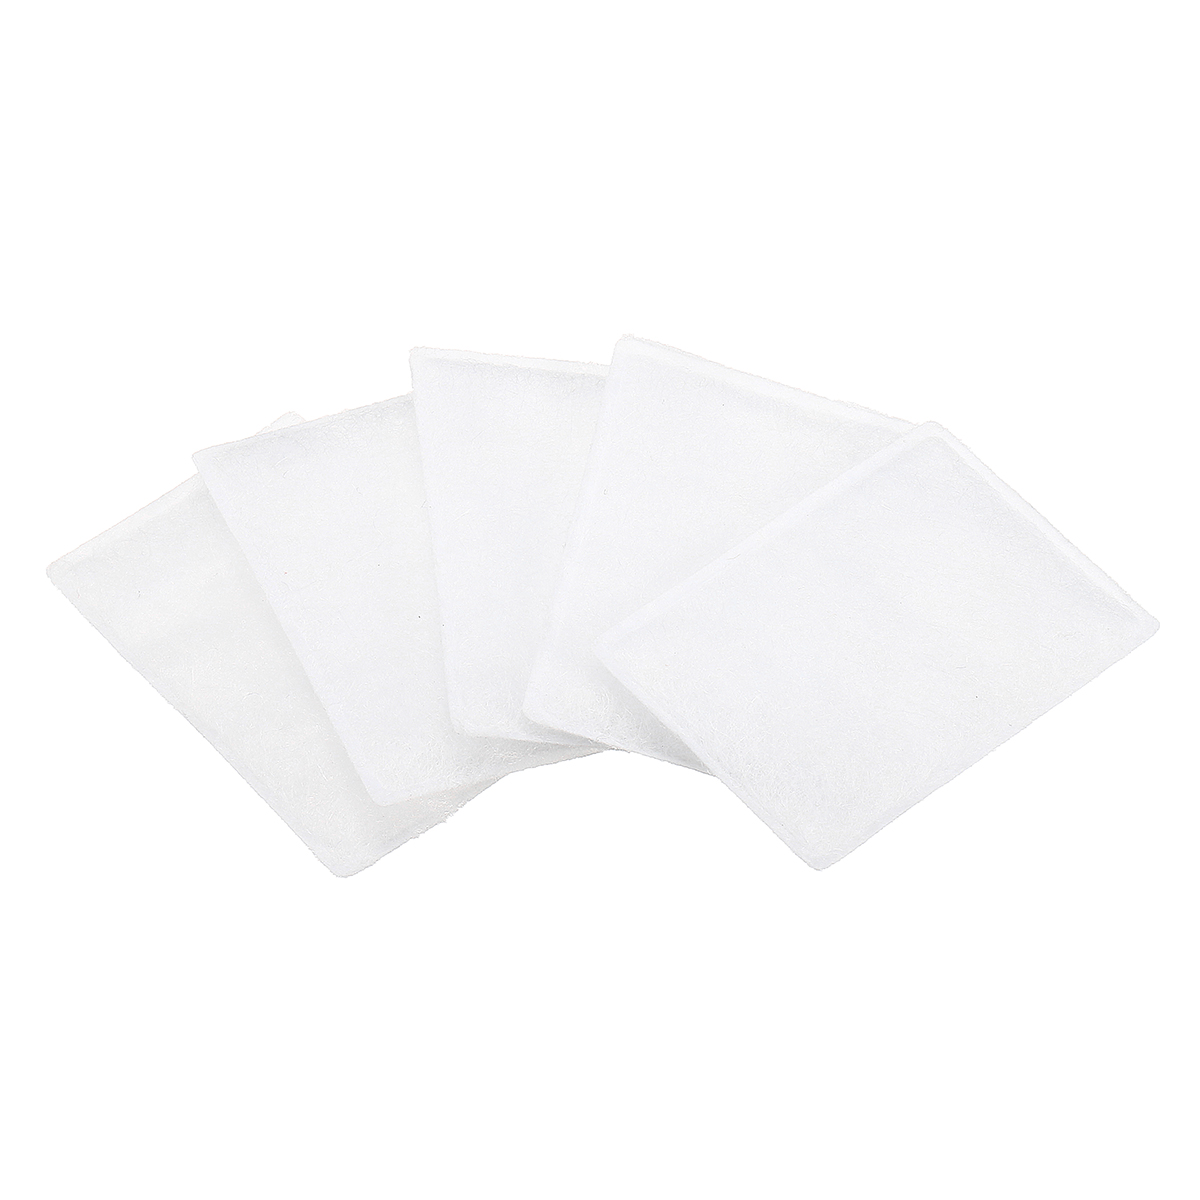 20pcs-Disposable-Universal-Replacement-Filter-For-S9S10-ResMed-AirSense-1363620-3